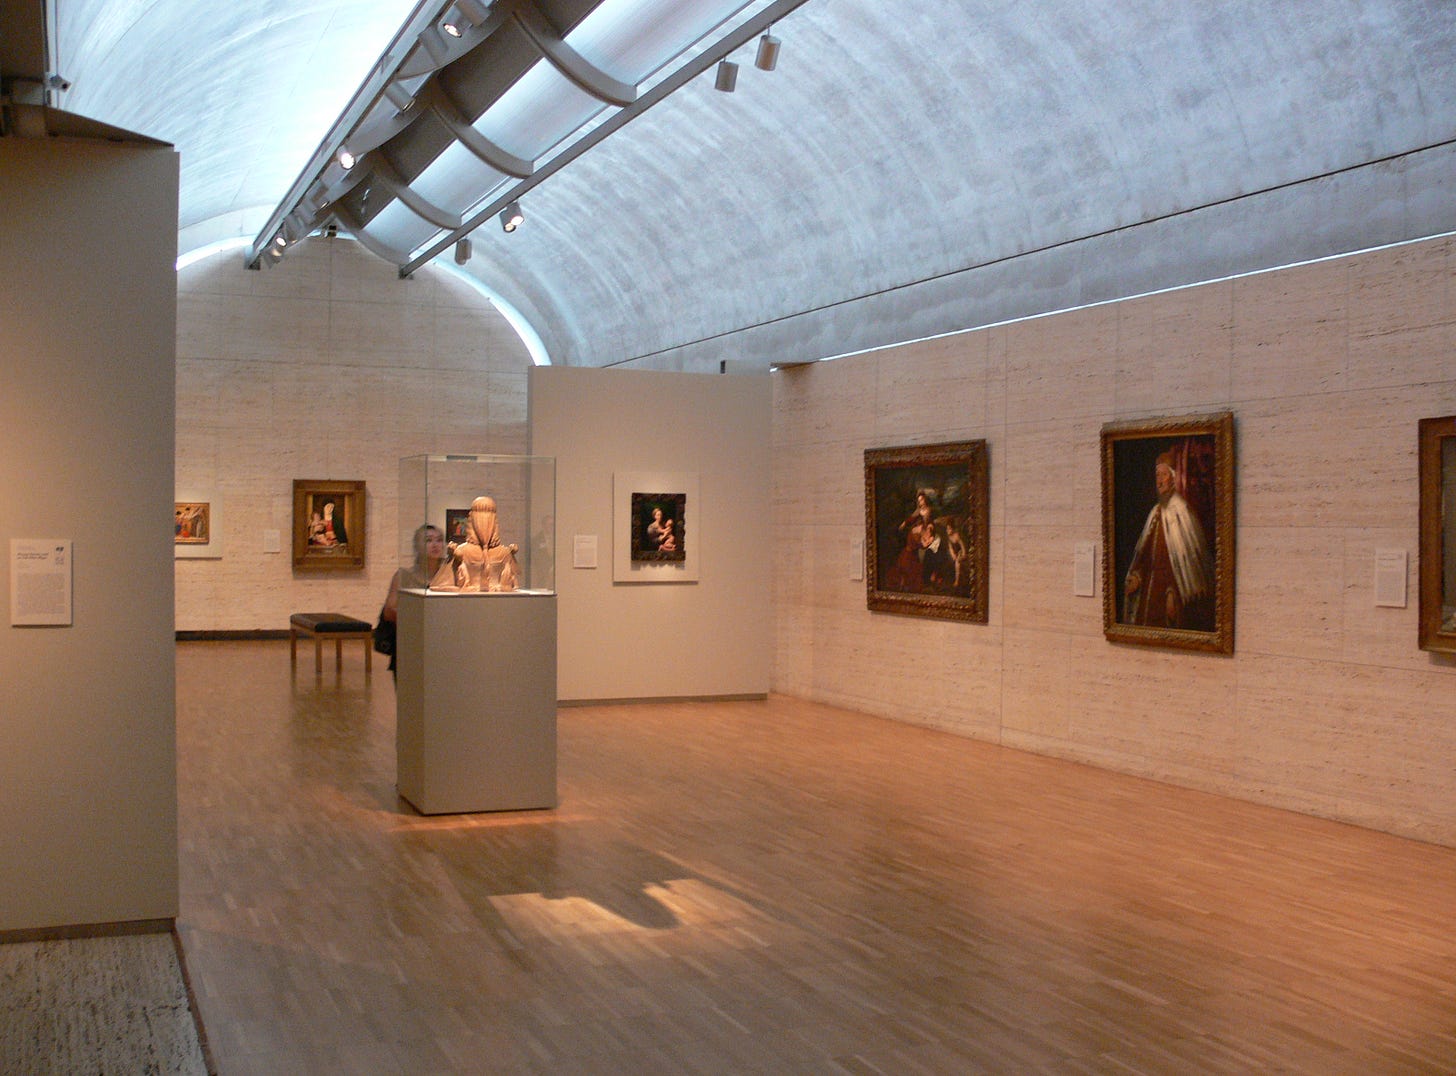 Kimbell Art Museum in Fort Worth, Texas. Photo by Andreas Praefcke